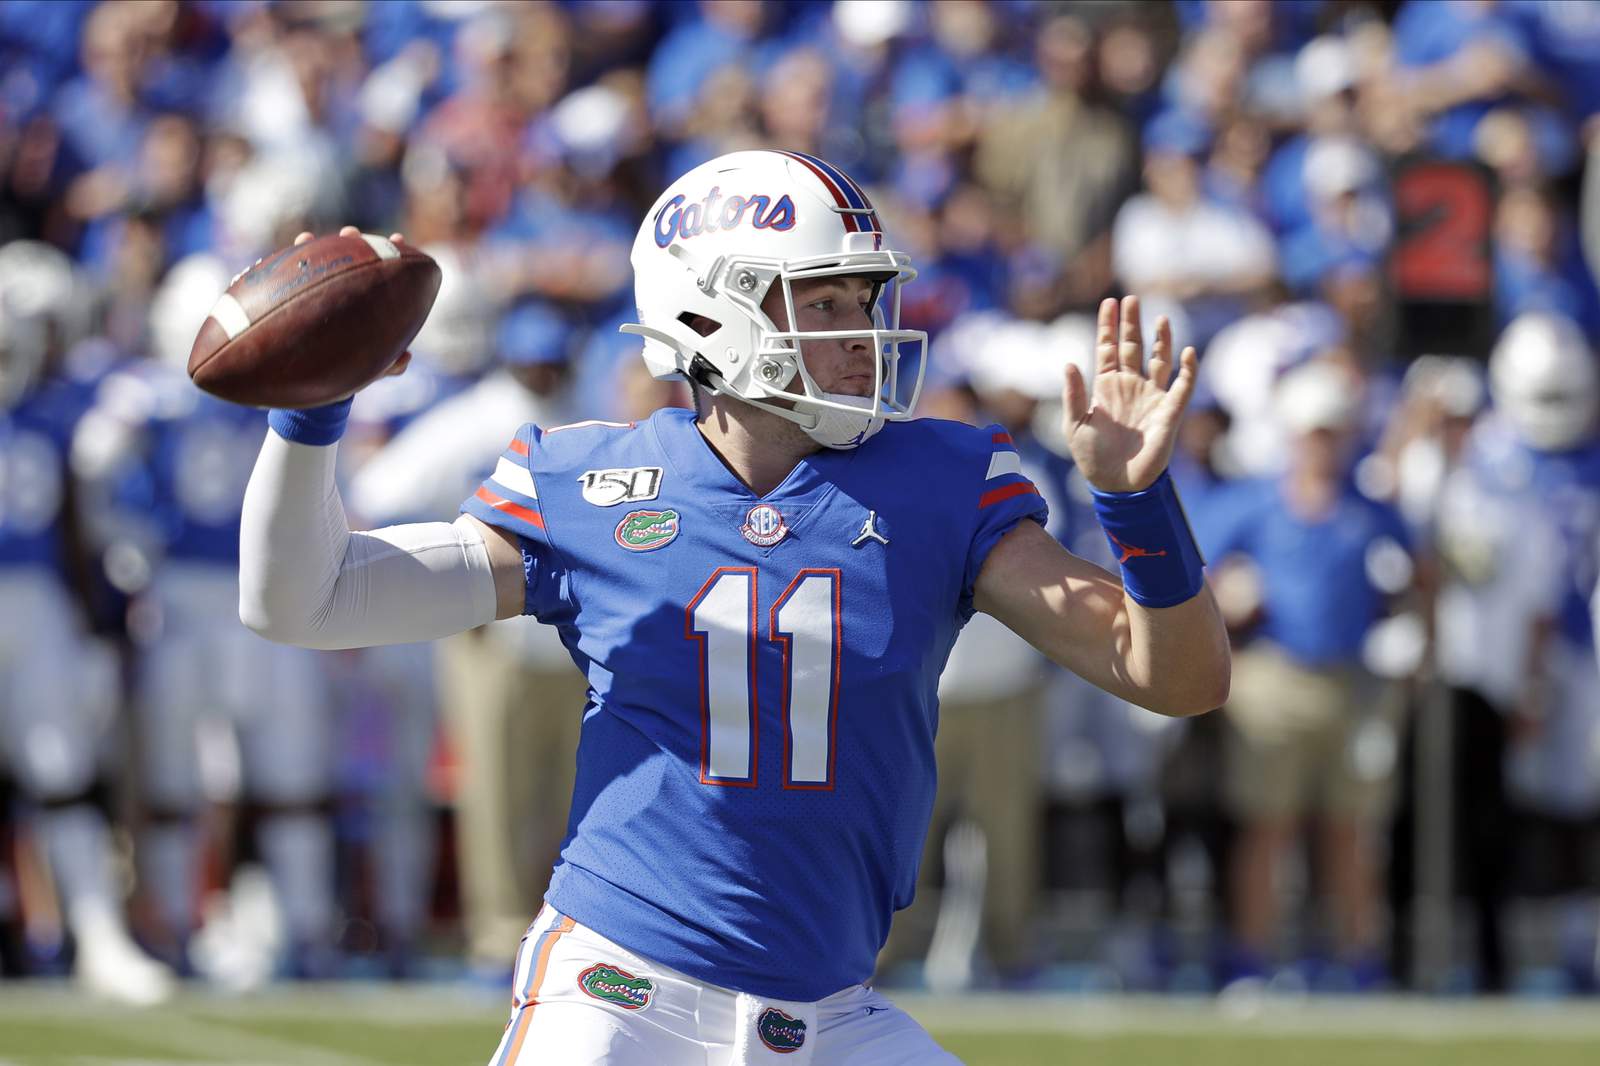 Florida vs Ole Miss: How to watch, stream, listen